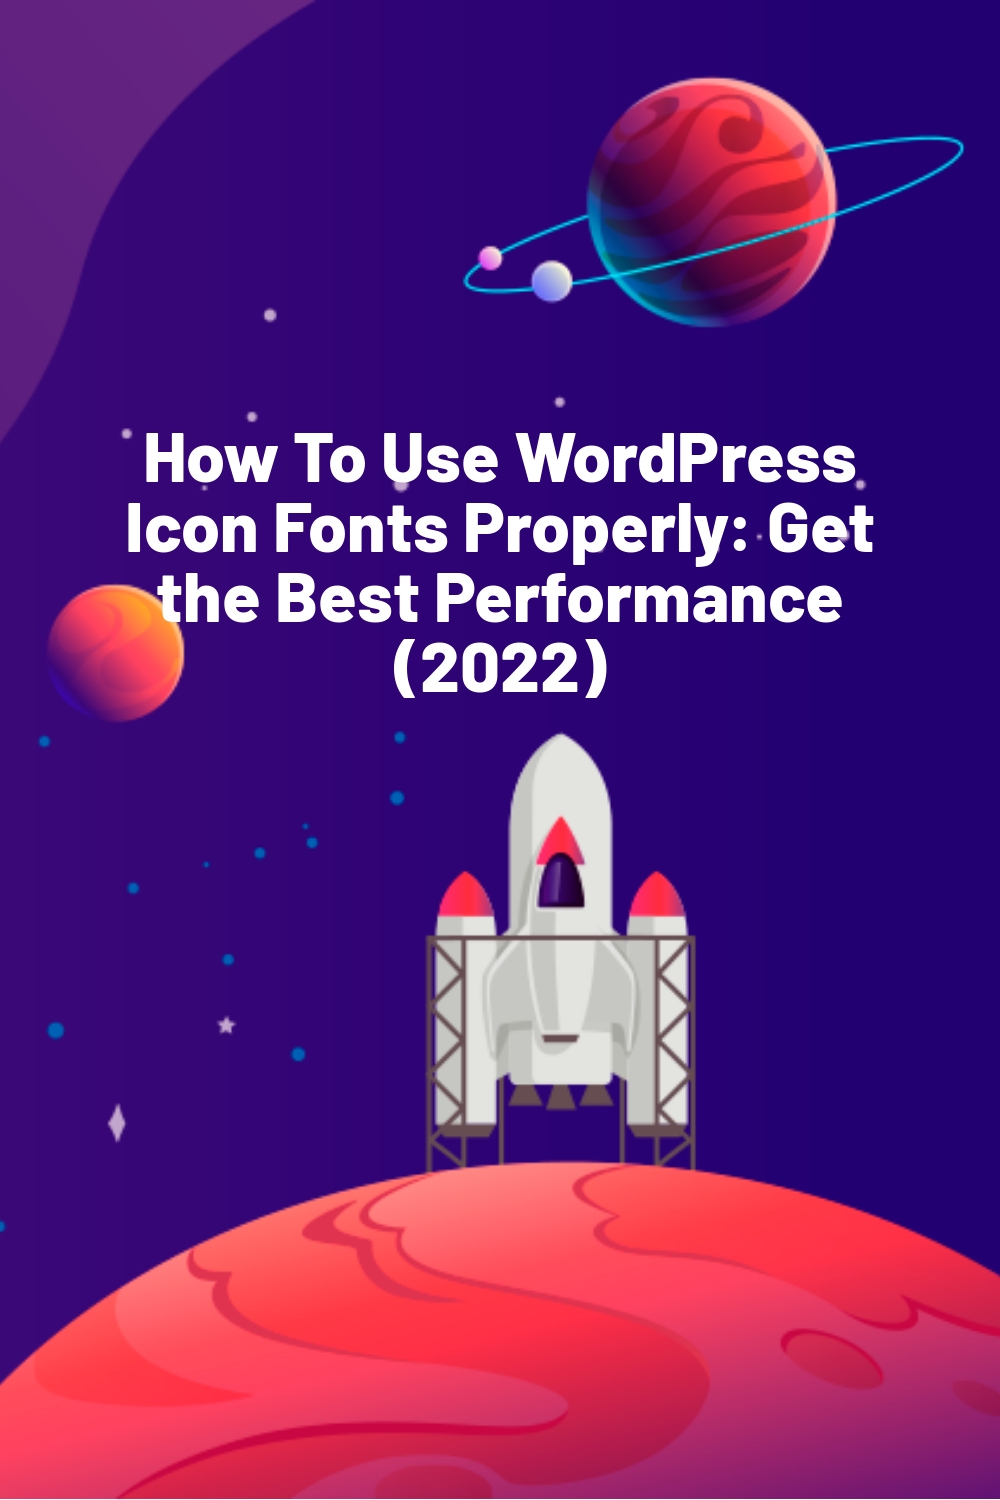 How To Use WordPress Icon Fonts Properly: Get the Best Performance (2022)